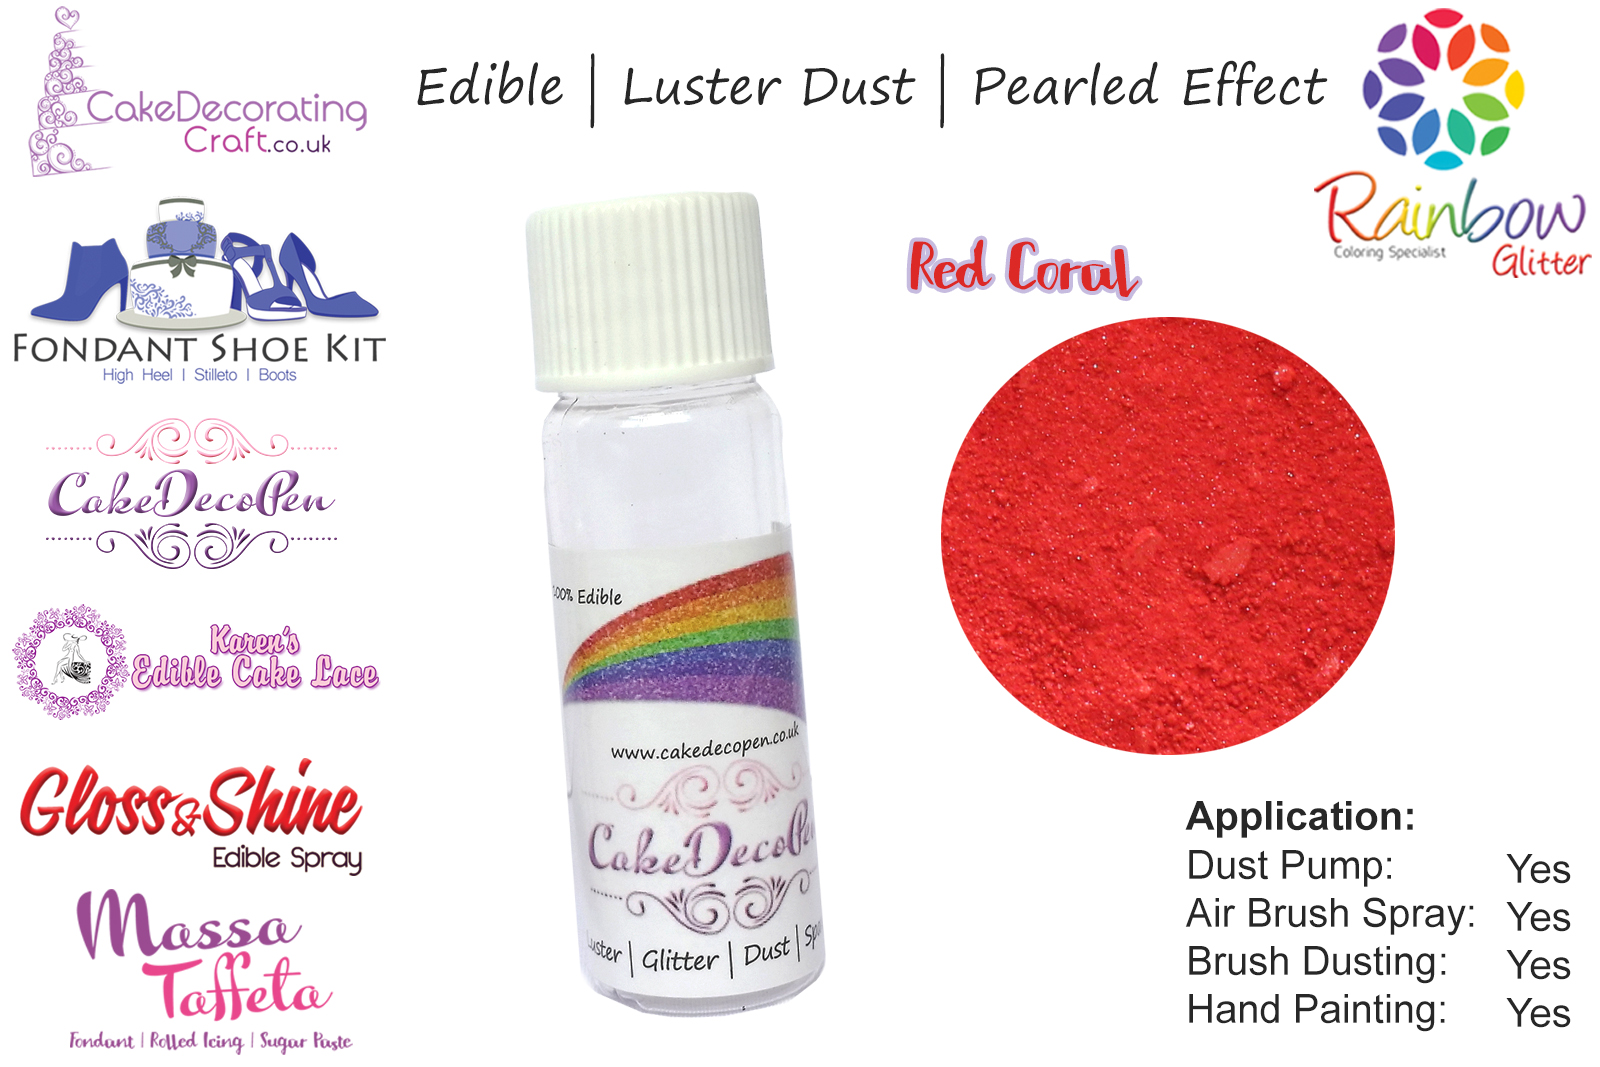 Red Coral | Pearled | Luster | Shimmer | Gloss | Edible Dust | 4 Gram Tube | Cake Decorating Craft